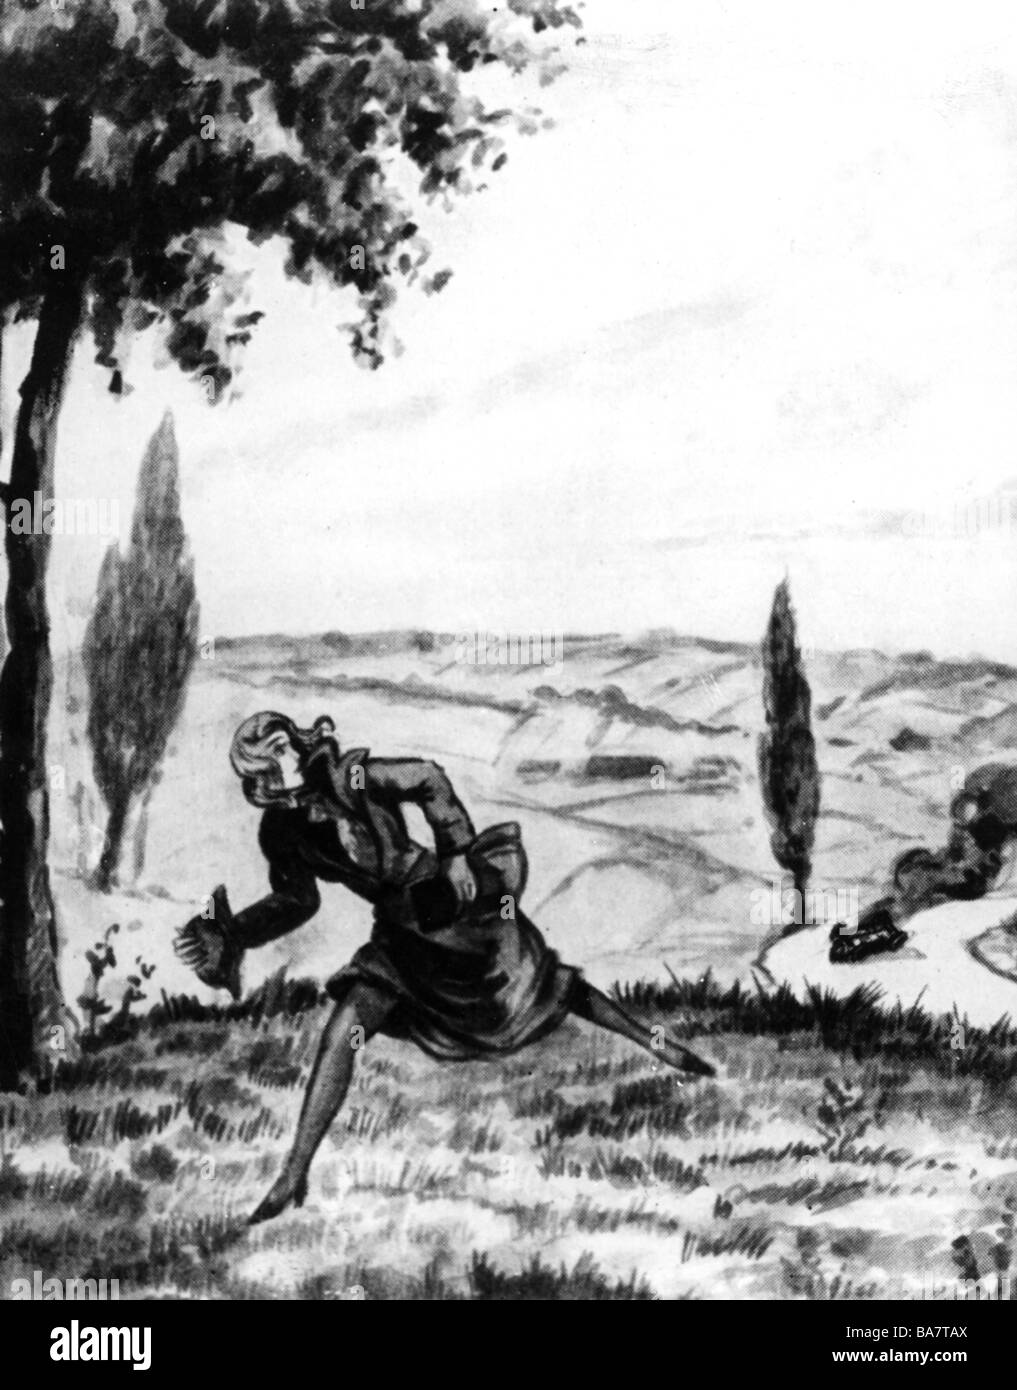 Schragmueller, Elisabeth, 7.8.1892 - 1940, German spy, scene, French drawing, 'Mademoiselle Docteur running away from a burning car', Stock Photo